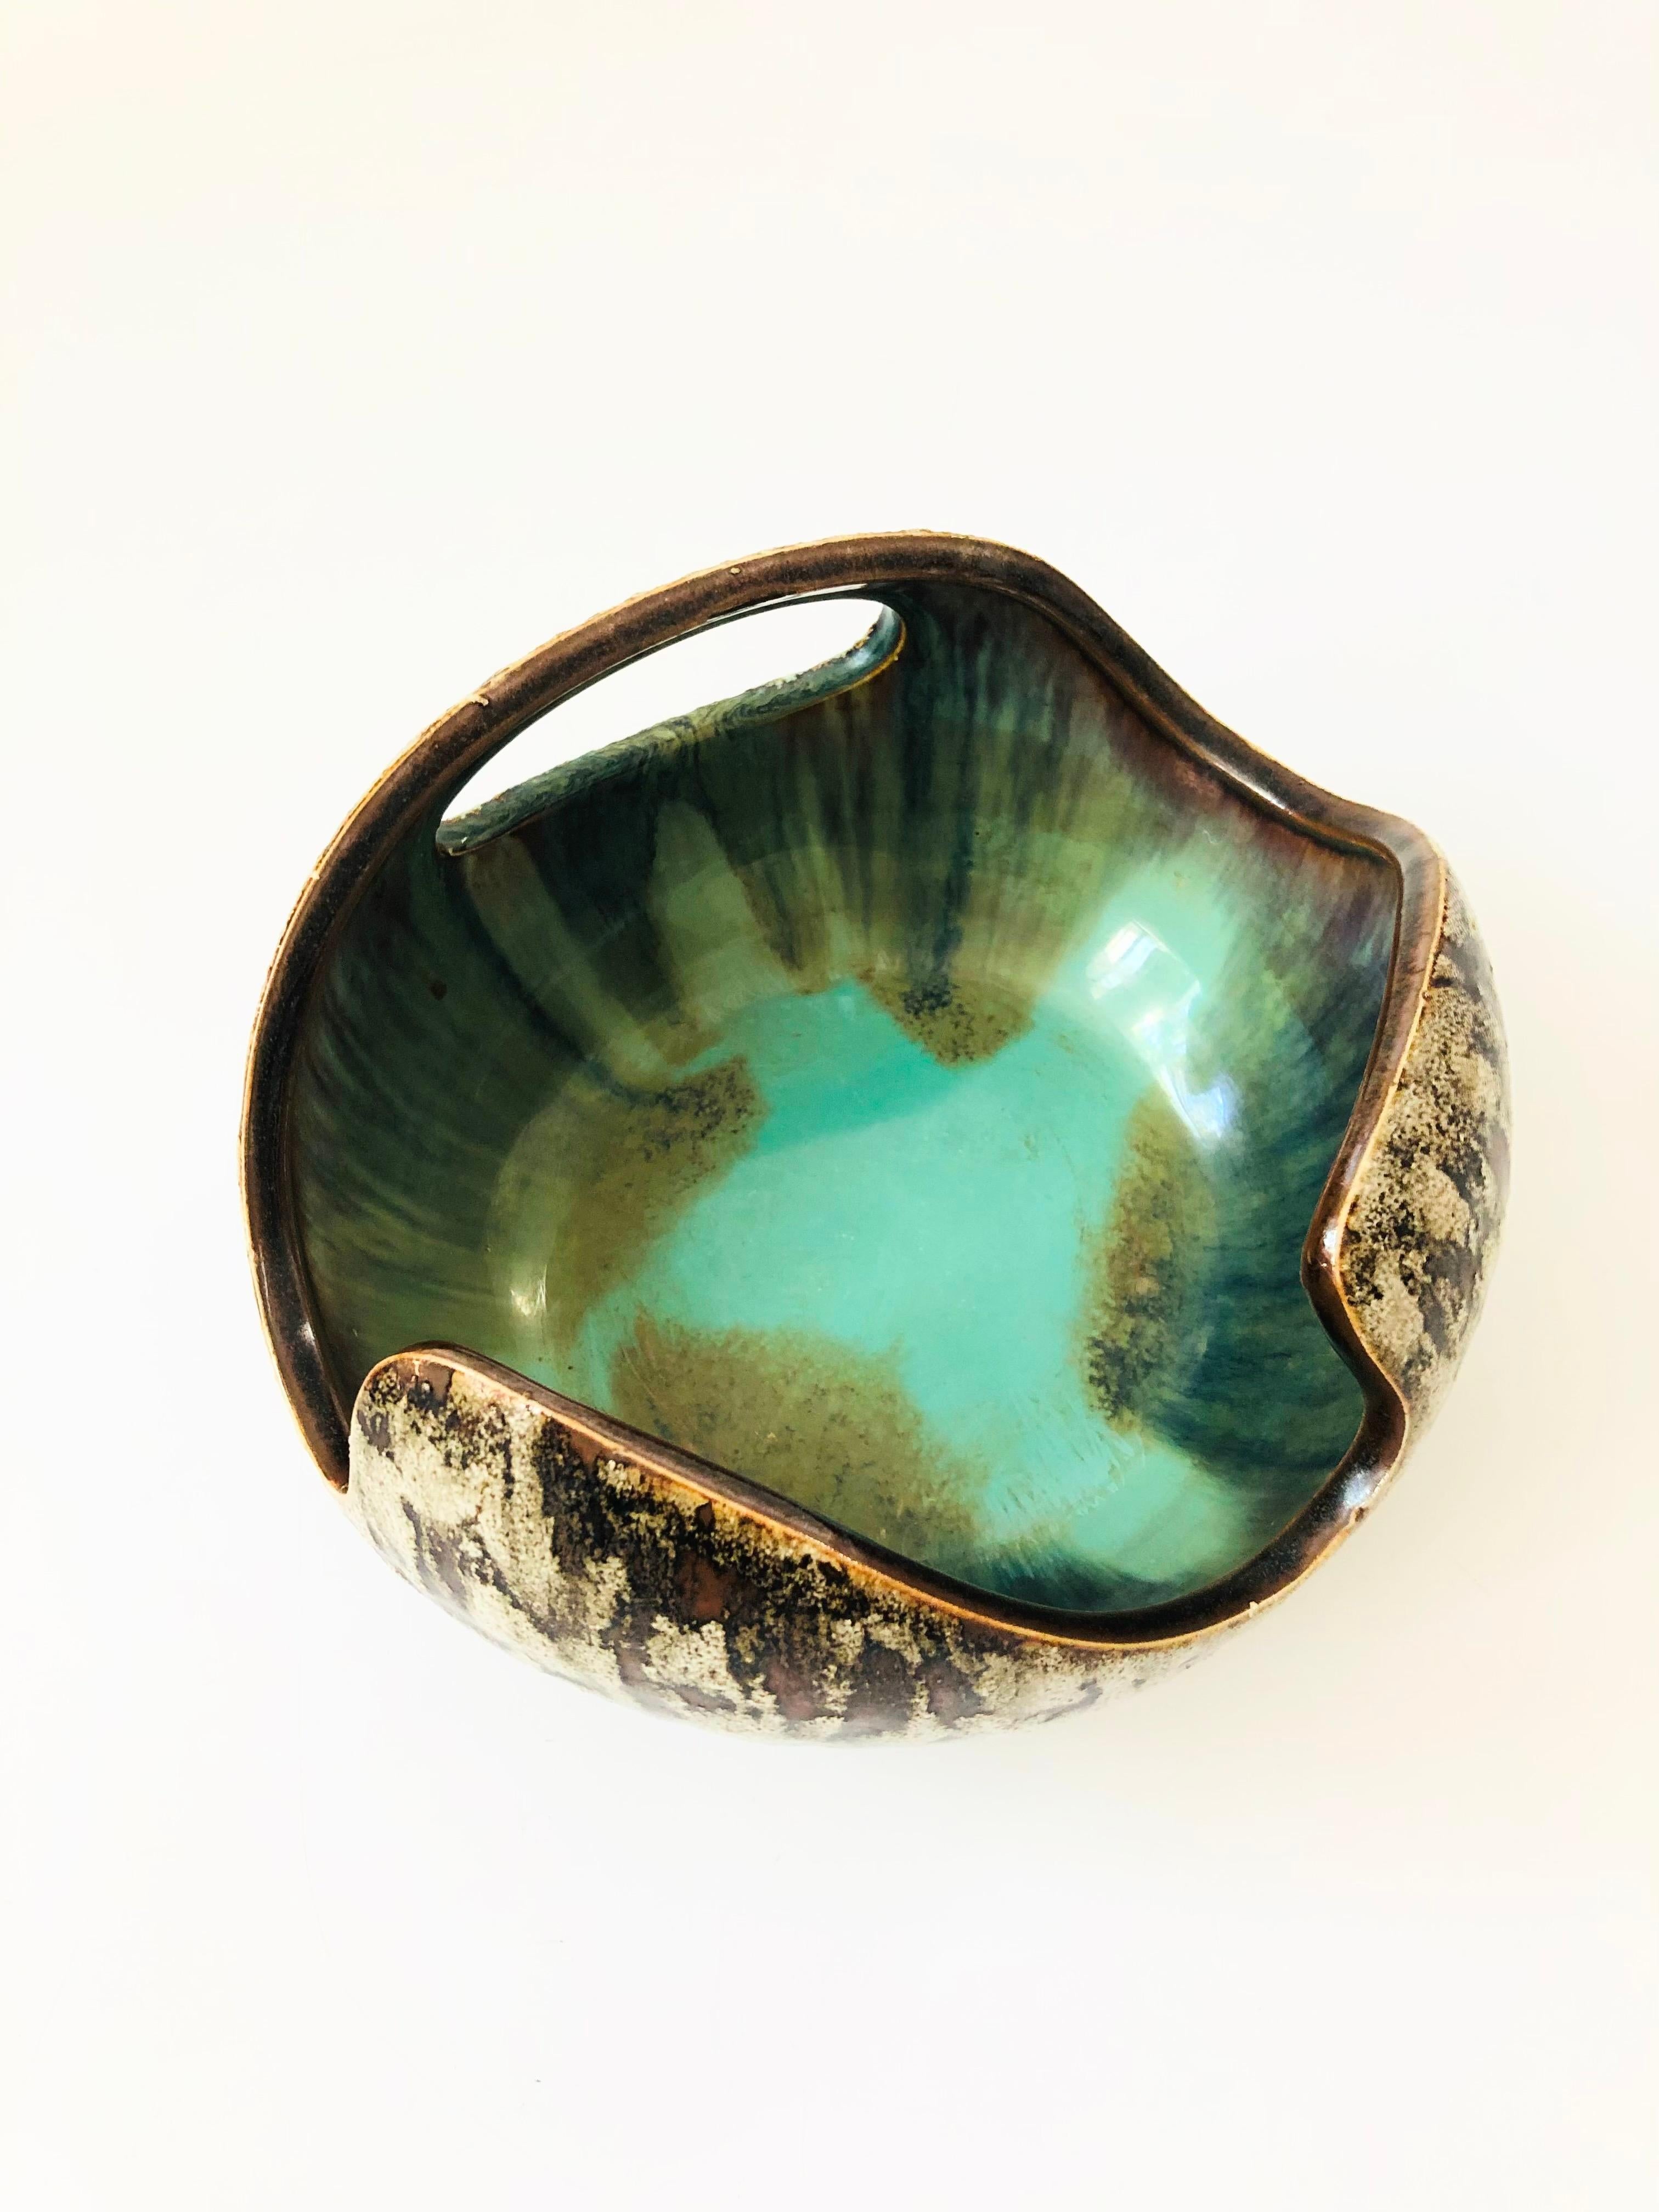 A vintage ikebana pottery bowl. Beautiful organic shape with a textured exterior glaze in natural colors. Contrasting turquoise glaze to the interior. Perfect for creating a sculptural flower arrangement or using as a centerpiece.

